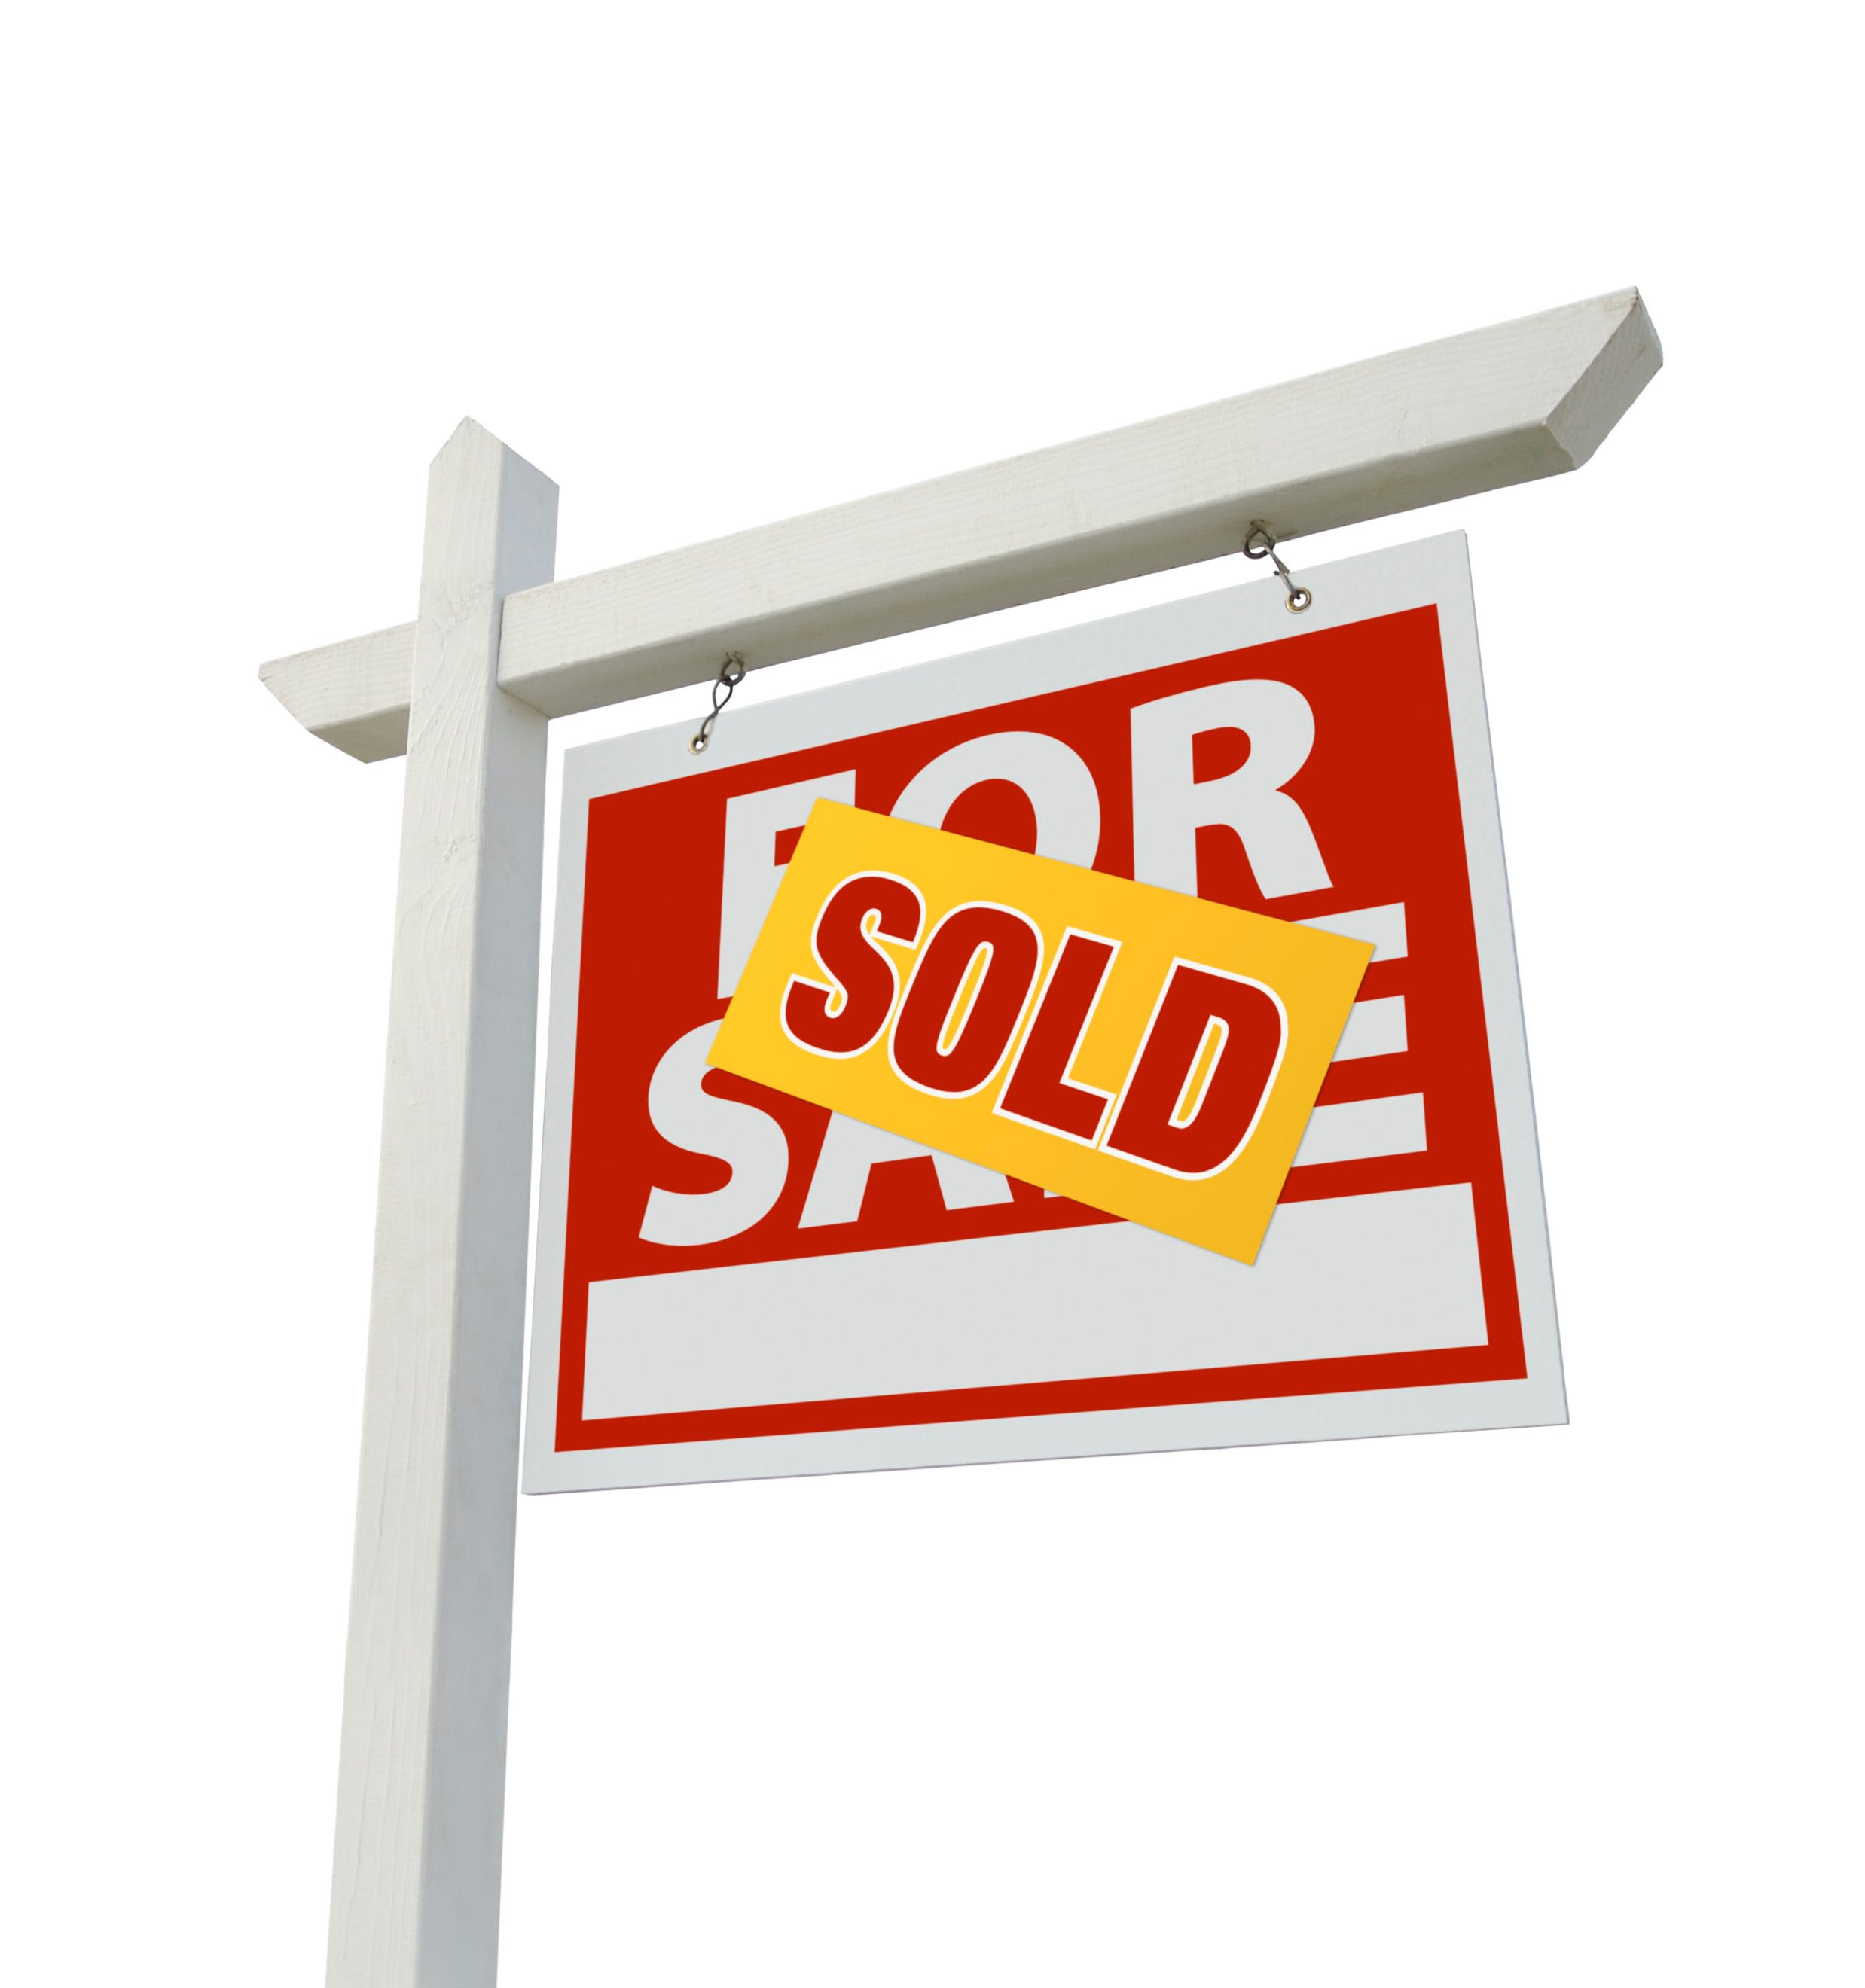 Property transfers: Sales range from $400 to $525K